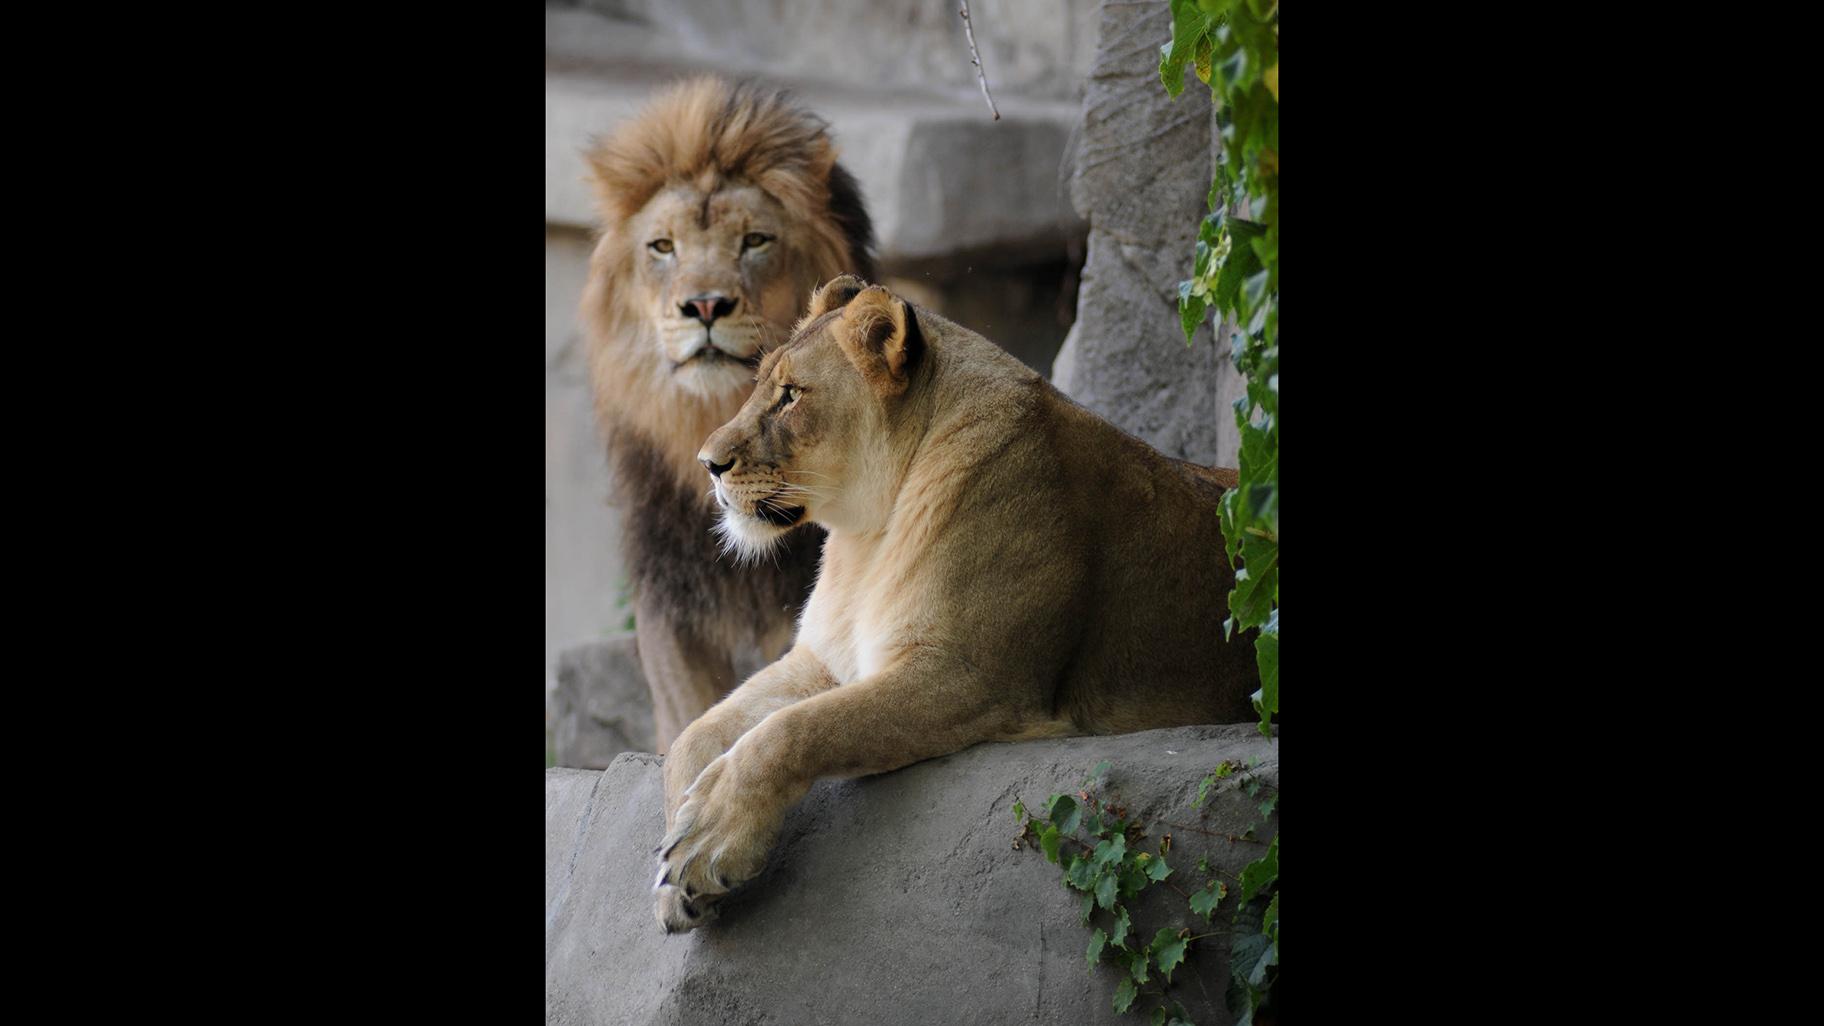 Zenda, left, and Isis. (Jim Schulz / Chicago Zoological Society)